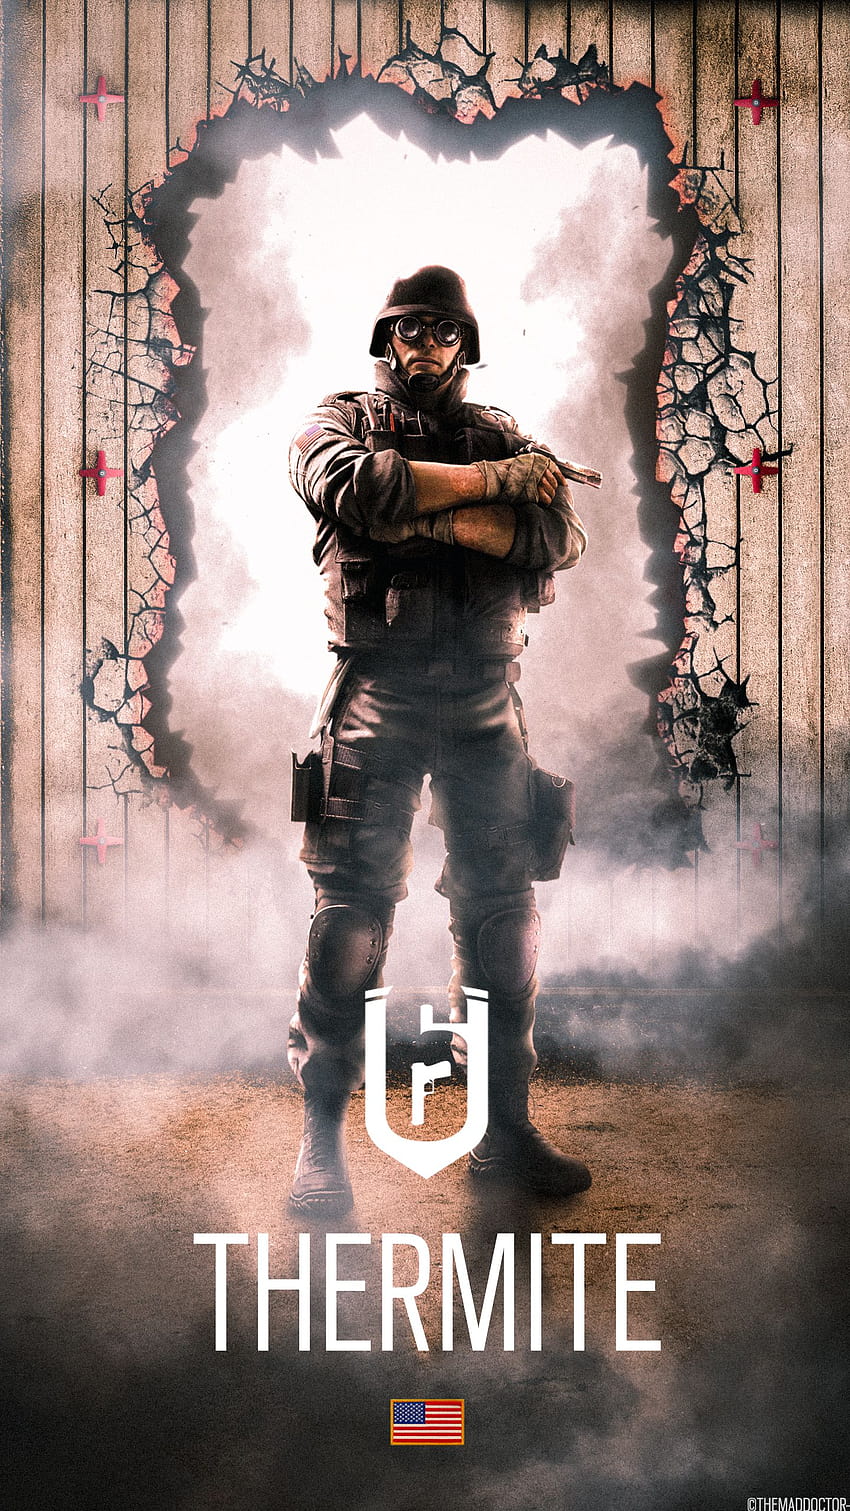 A Thermite's really big fuc**** coming right up! : Rainbow6 HD phone wallpaper